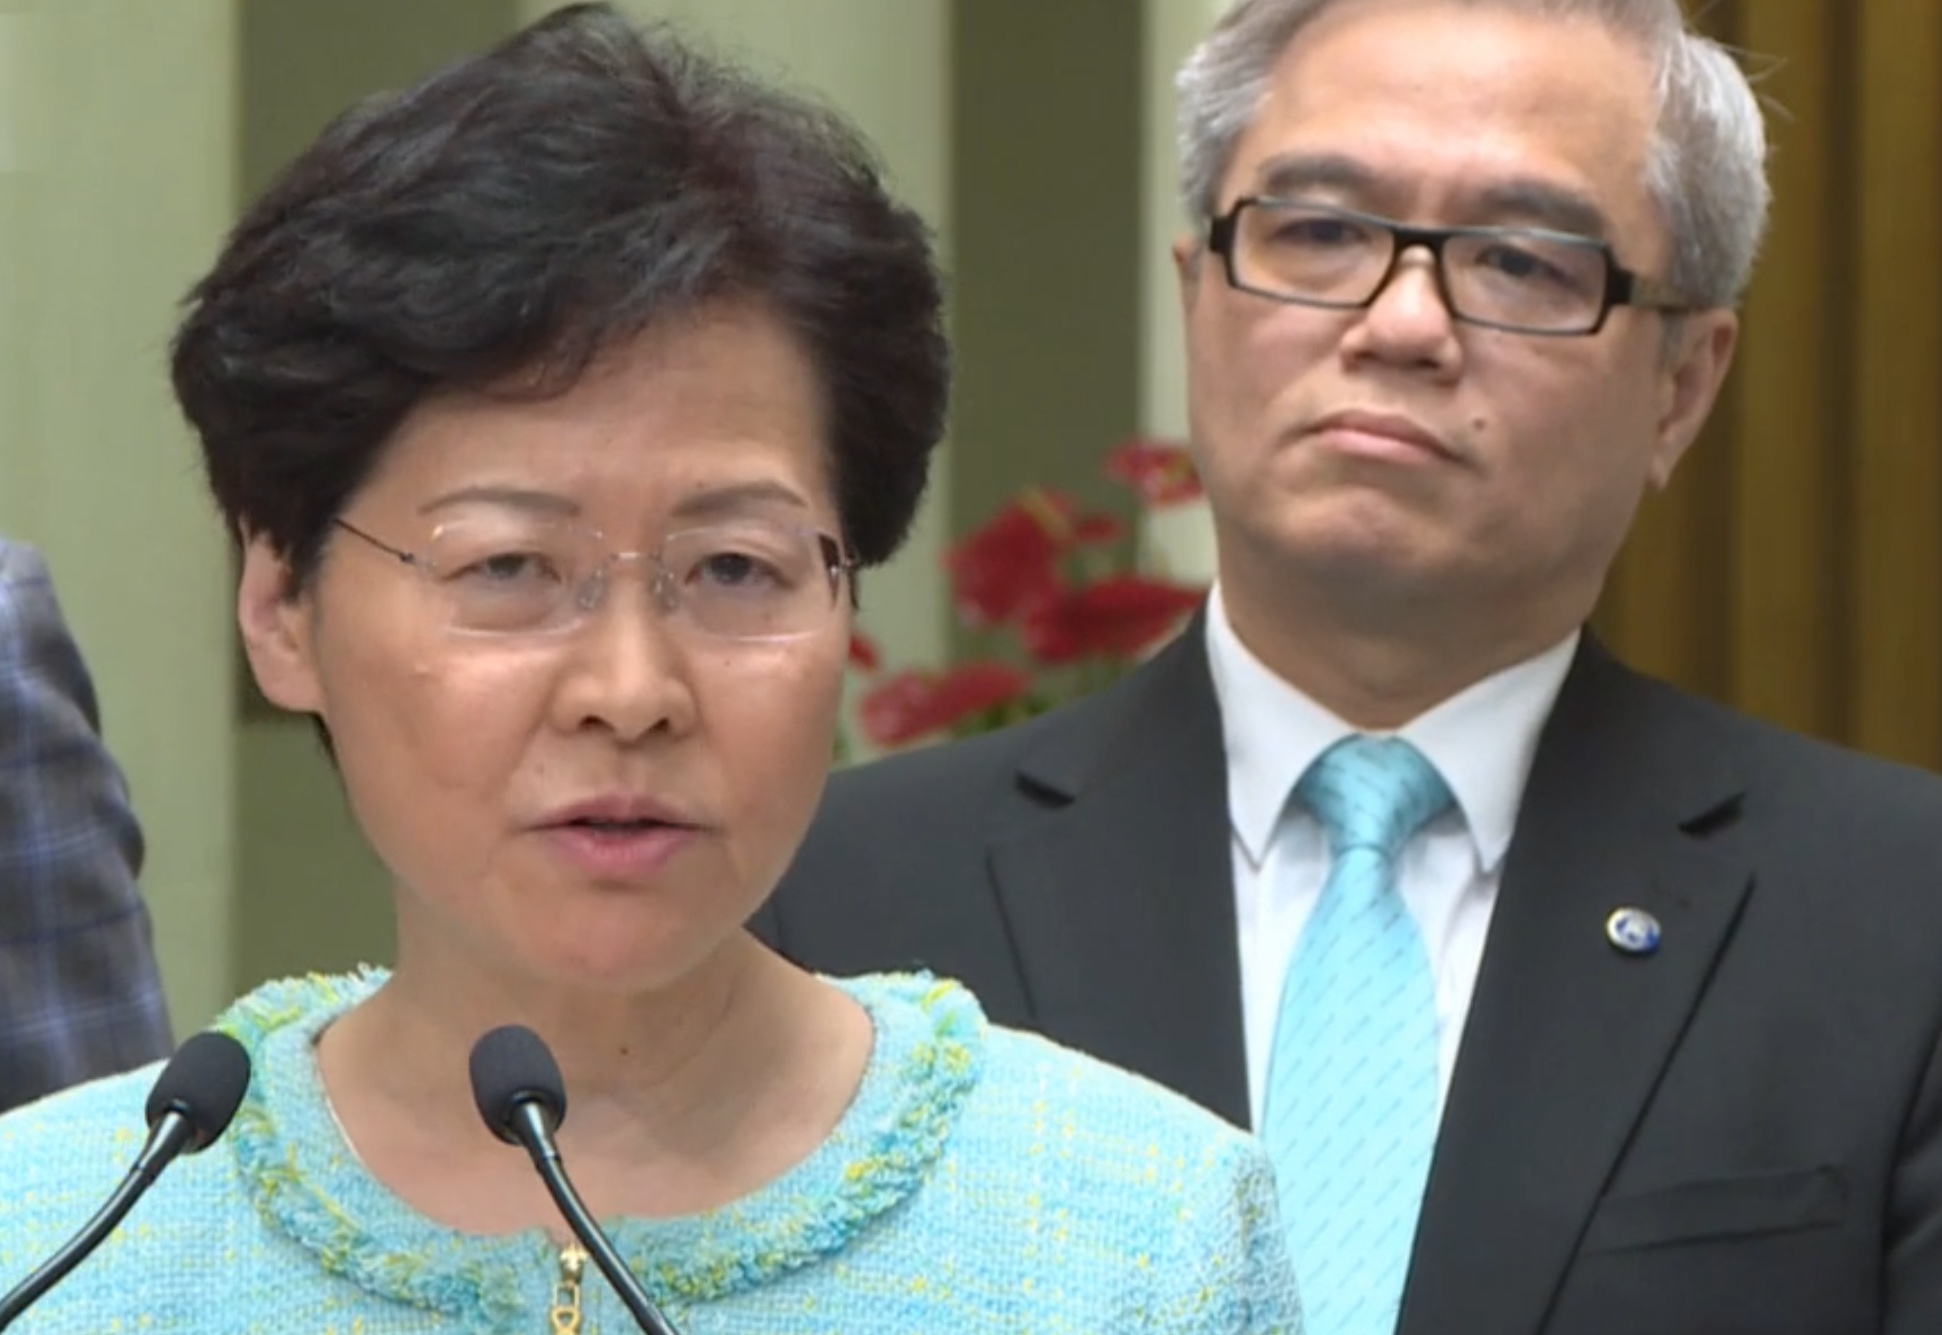 Hong Kong Chief Executive Carrie Lam speaks to the press today. Screengrab via Facebook.